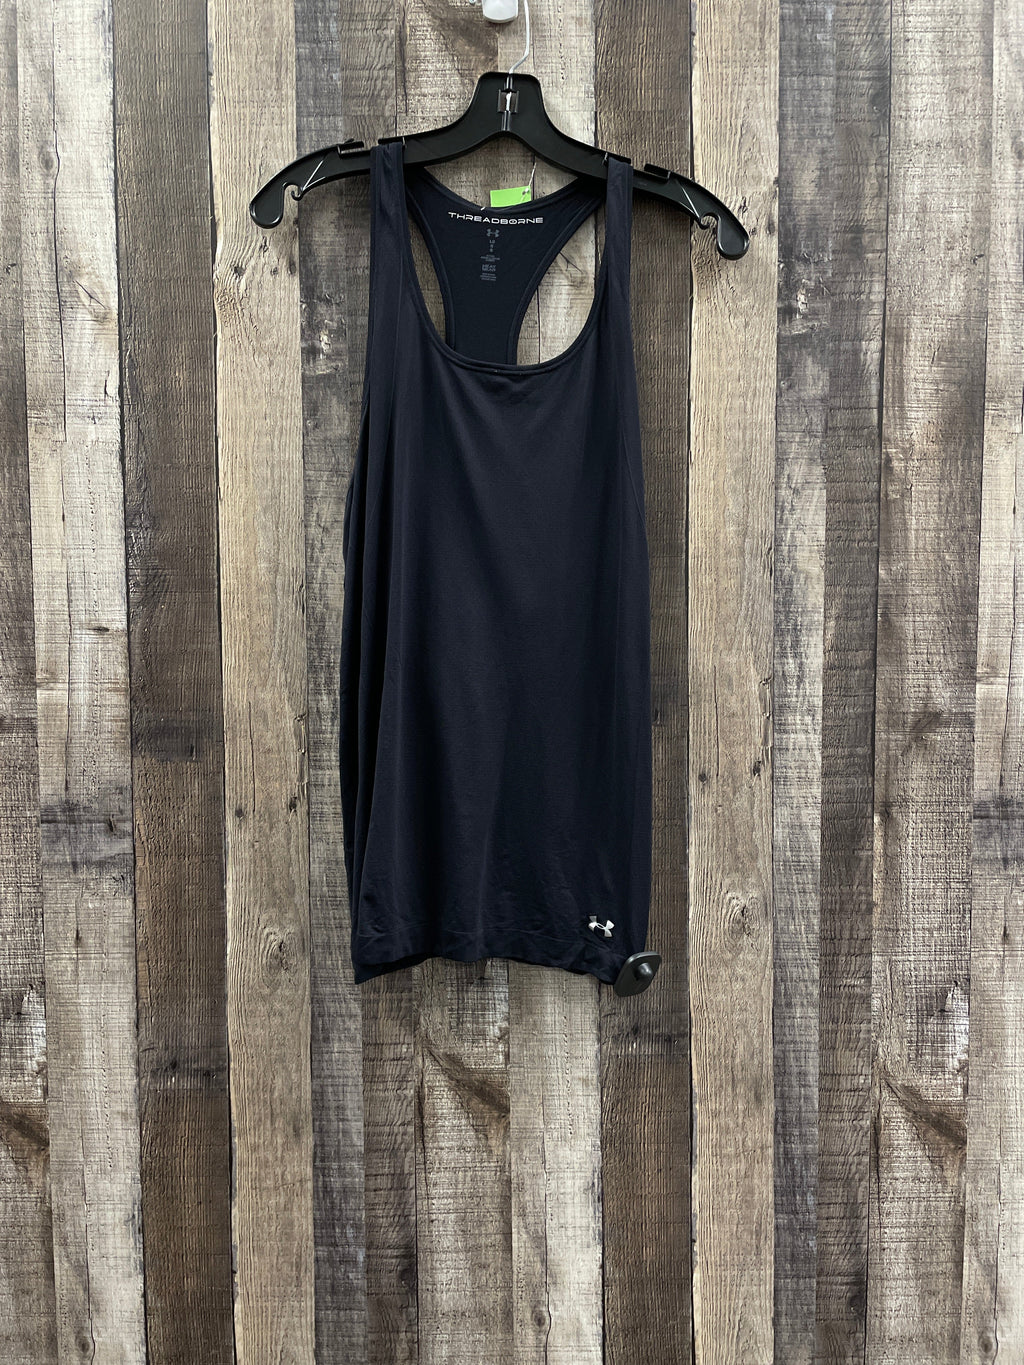 Women's Athlectic Tank Tops: Second Hand Fashion - Clothes Mentor